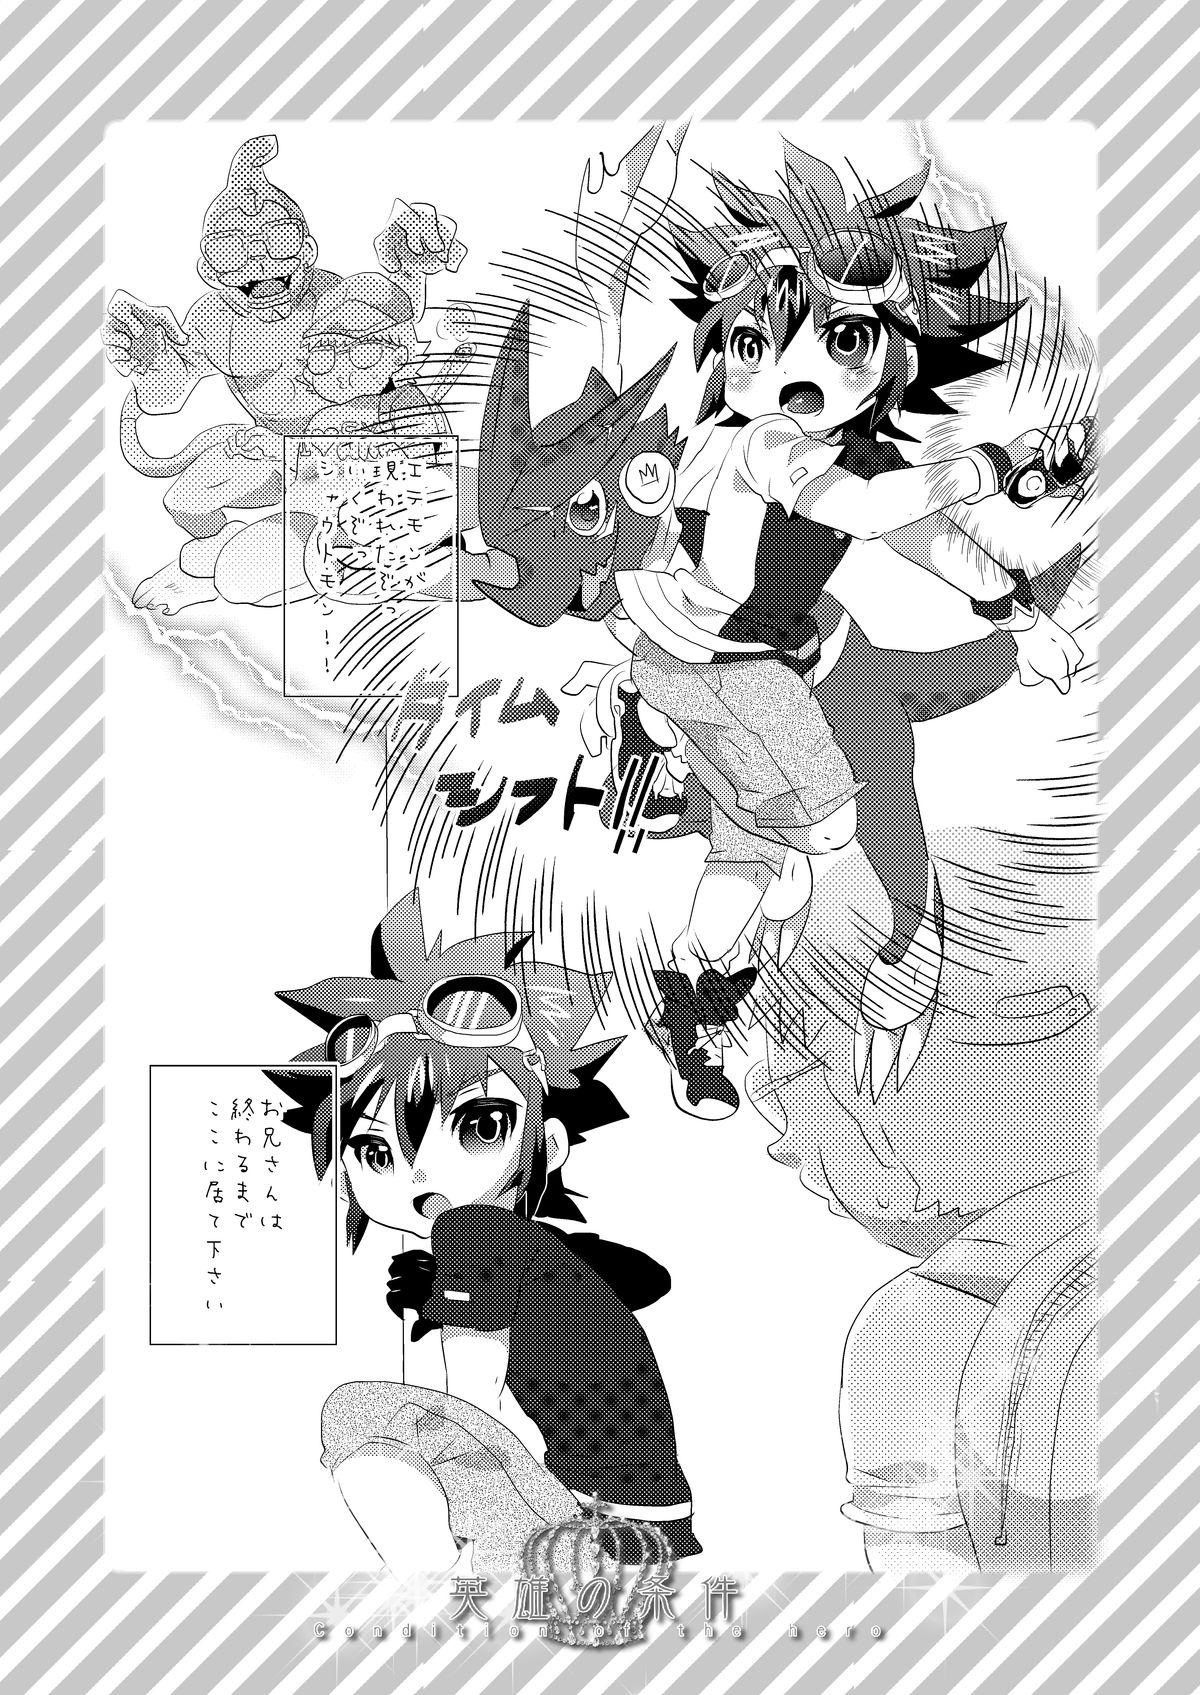 Cumload Eiyuu no Jouken - Condition of the Hero - Digimon xros wars Passion - Page 3